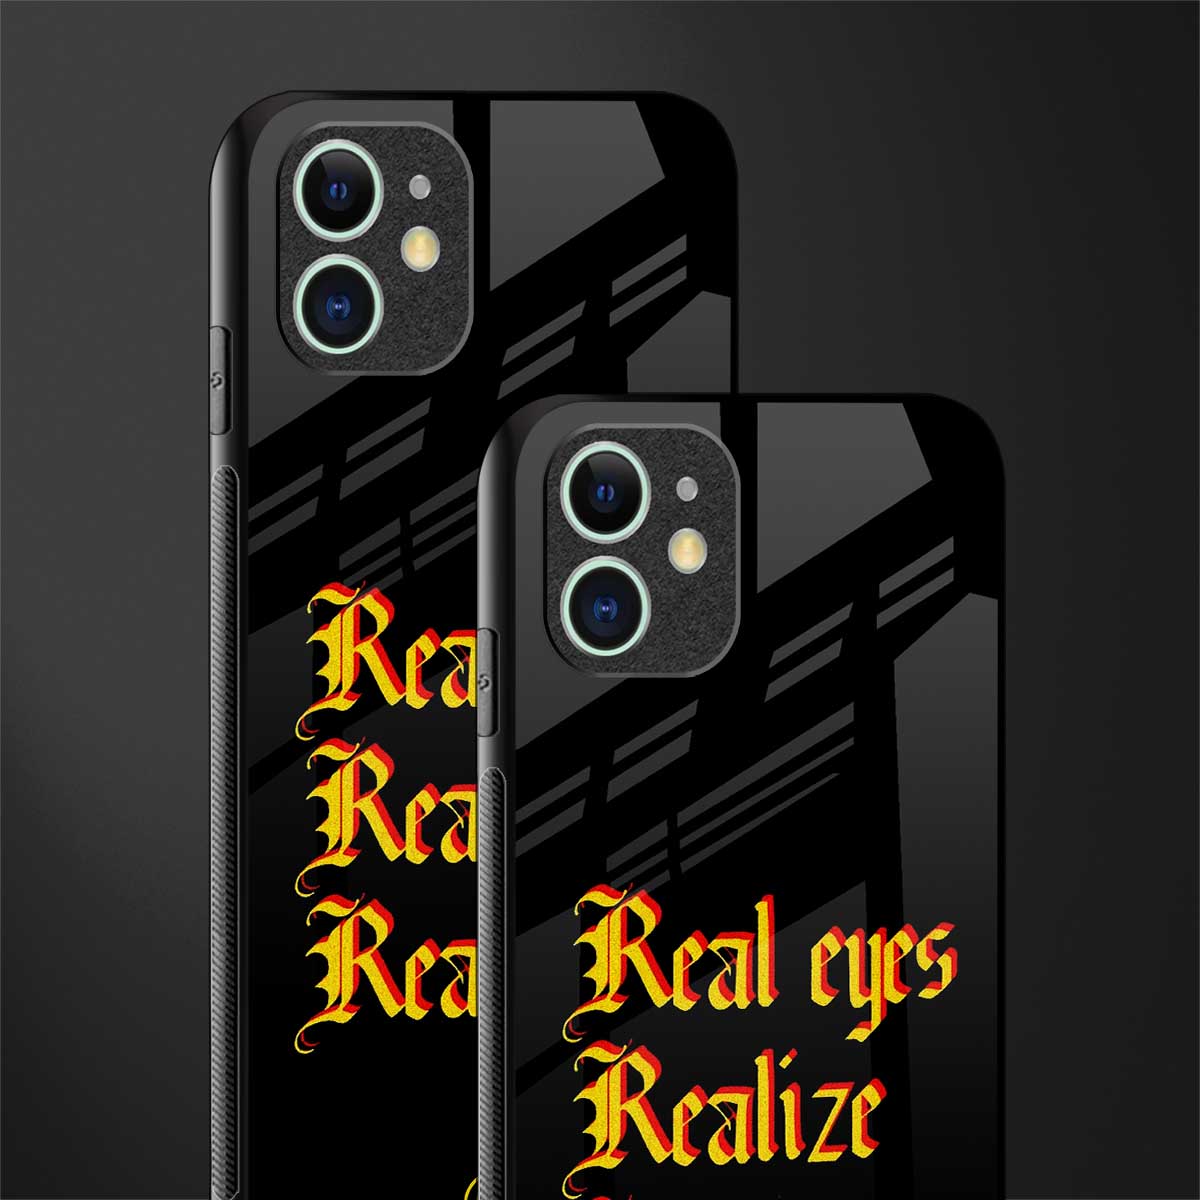 real eyes realize real lies quote glass case for iphone 12 image-2